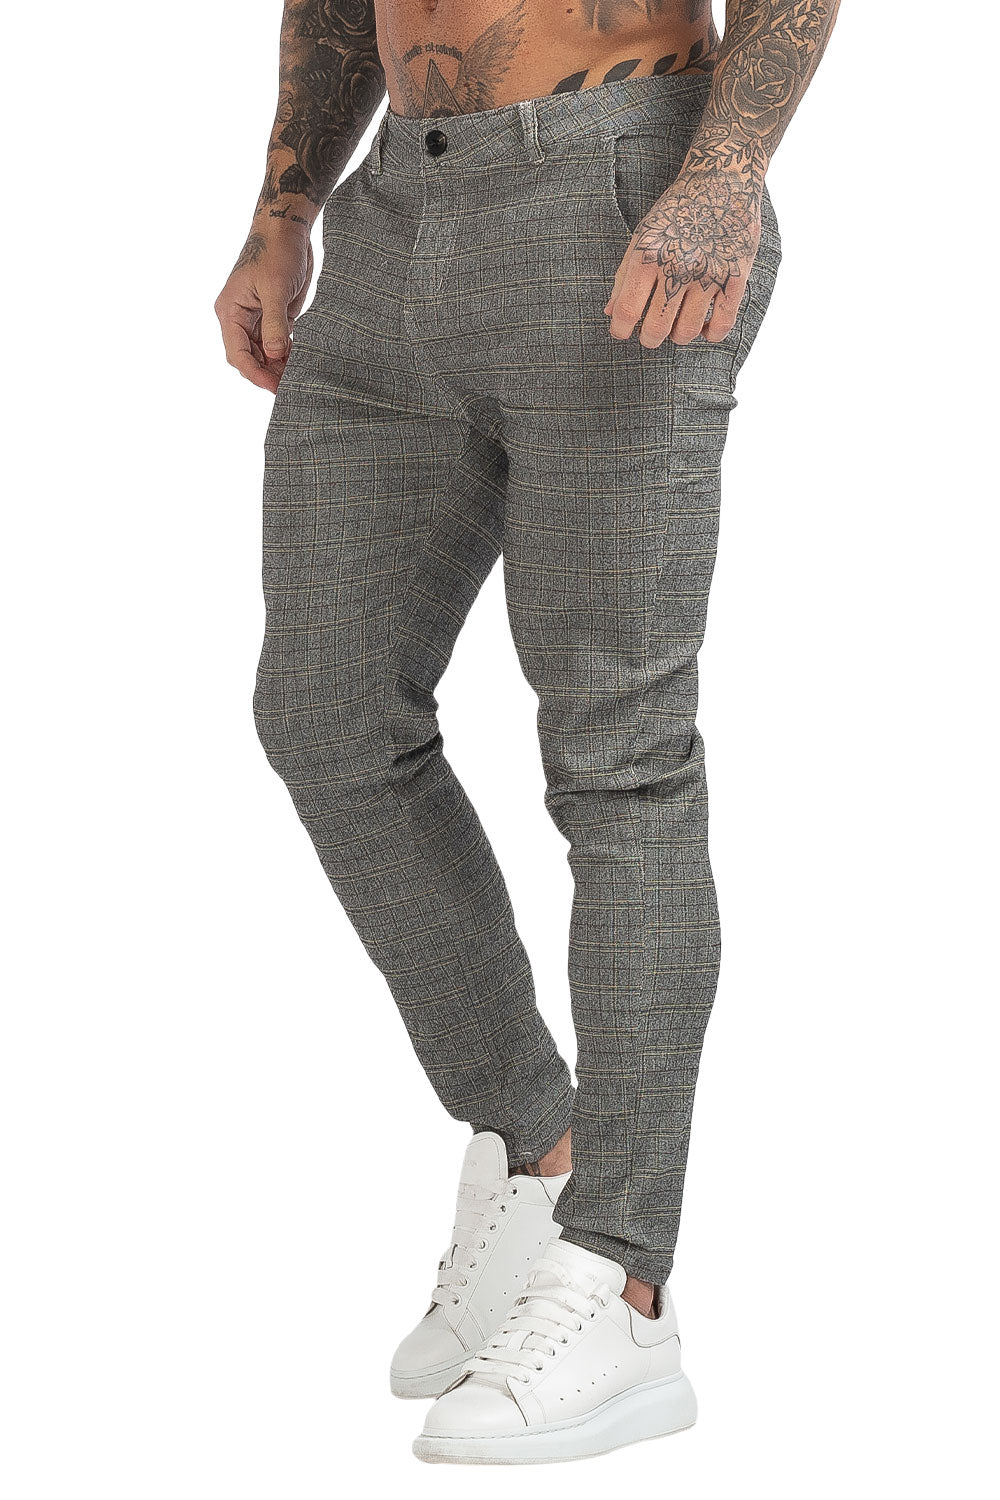 men's grey checked trousers